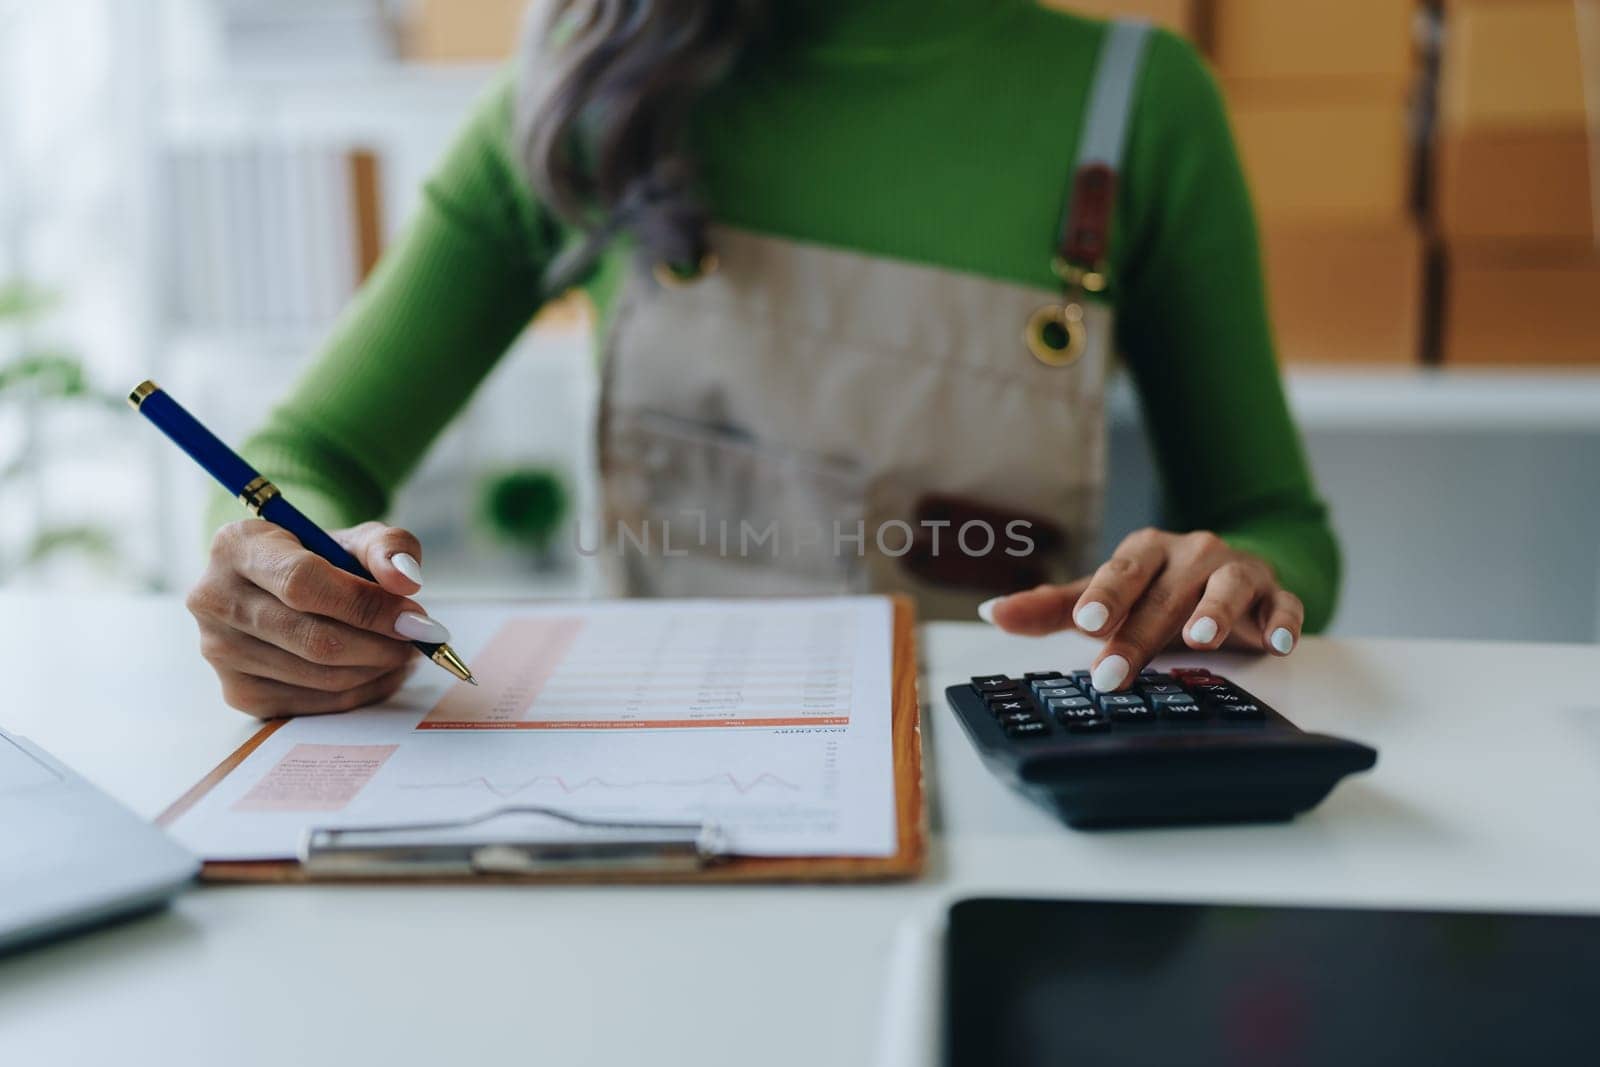 Small business, online business owner, young woman is using profit calculator and checking inventory.